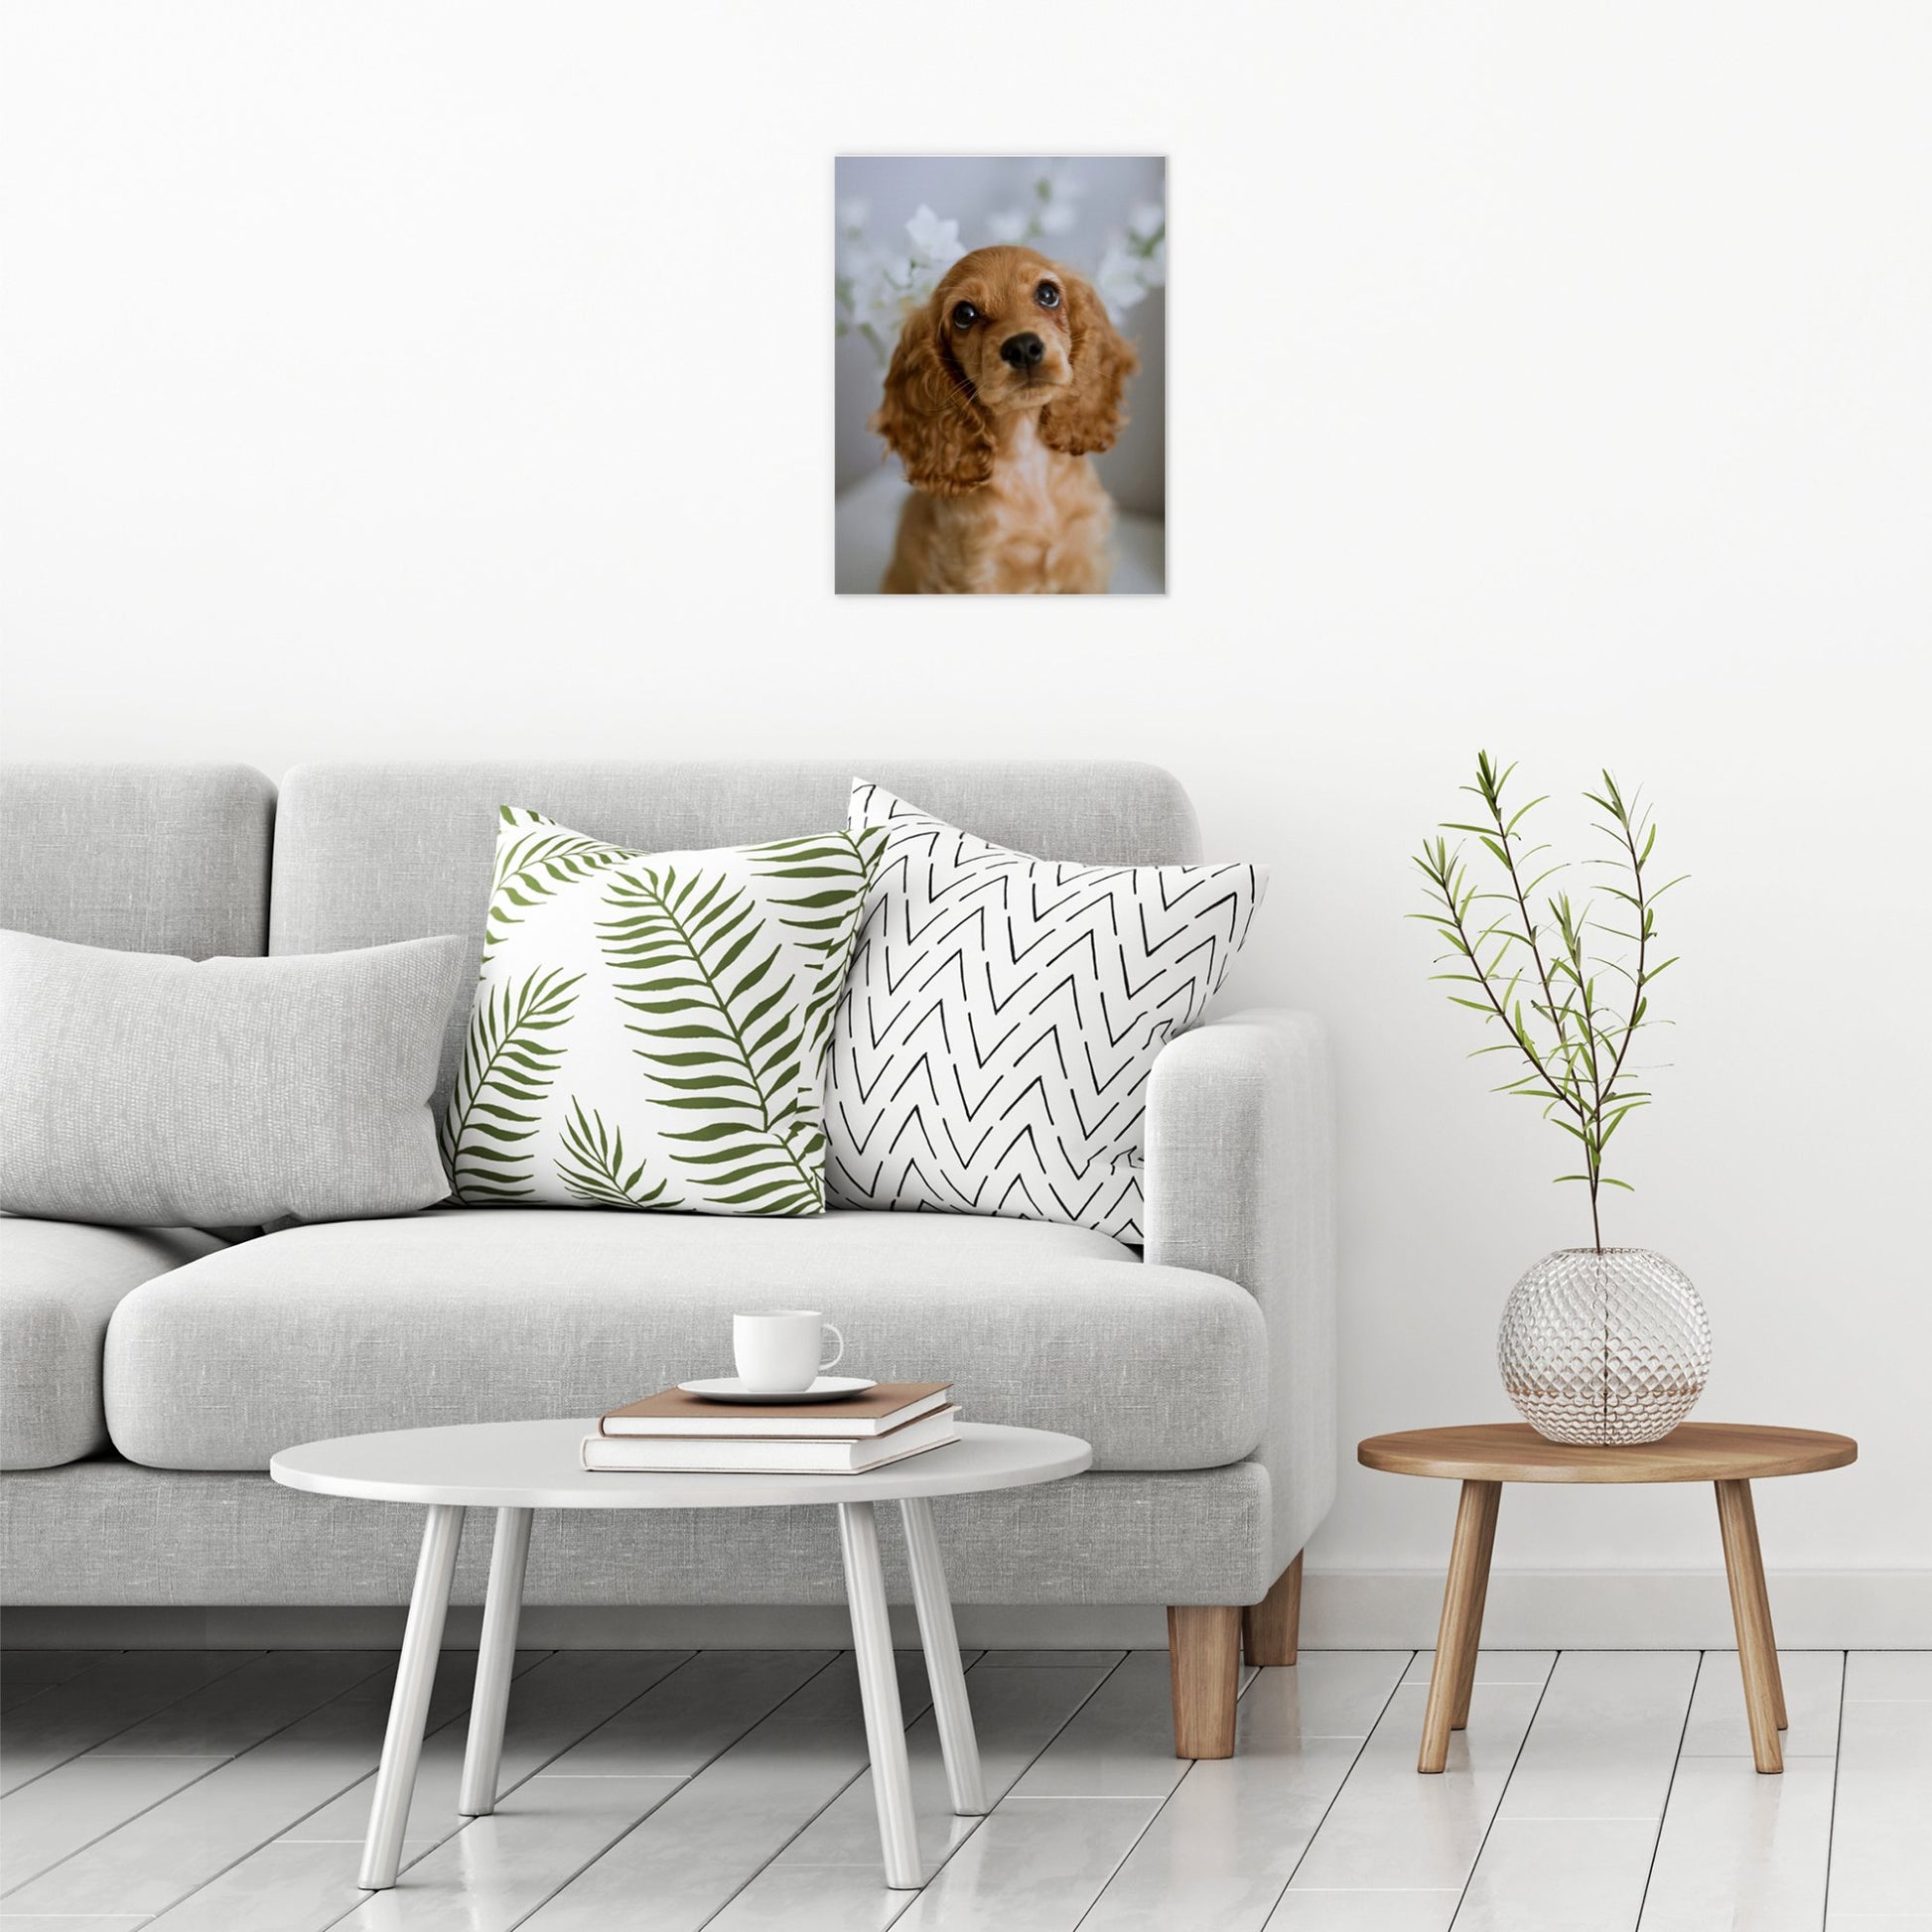 A contemporary modern room view showing a medium size metal art poster display plate with printed design of a Cute Golden Cocker Spaniel